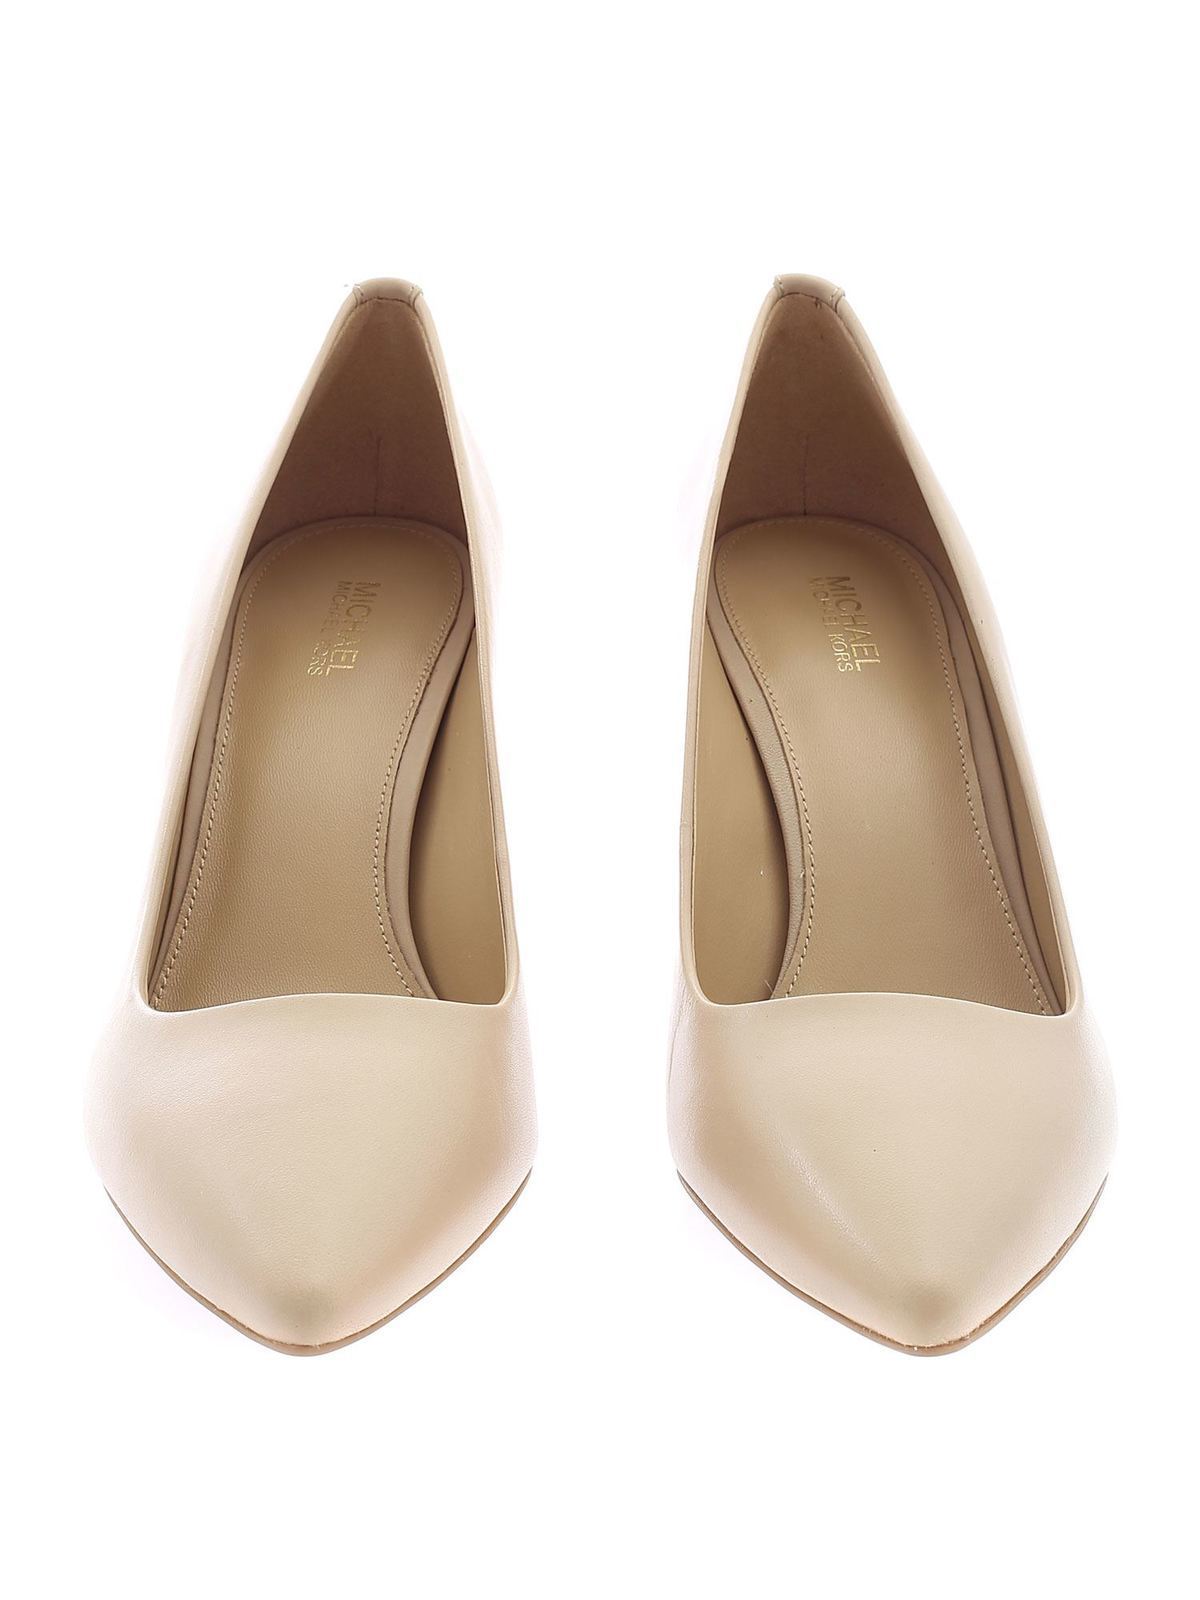 Court shoes Michael Kors - Dorothy leather pumps in nude color -  40F6DOMP1L112